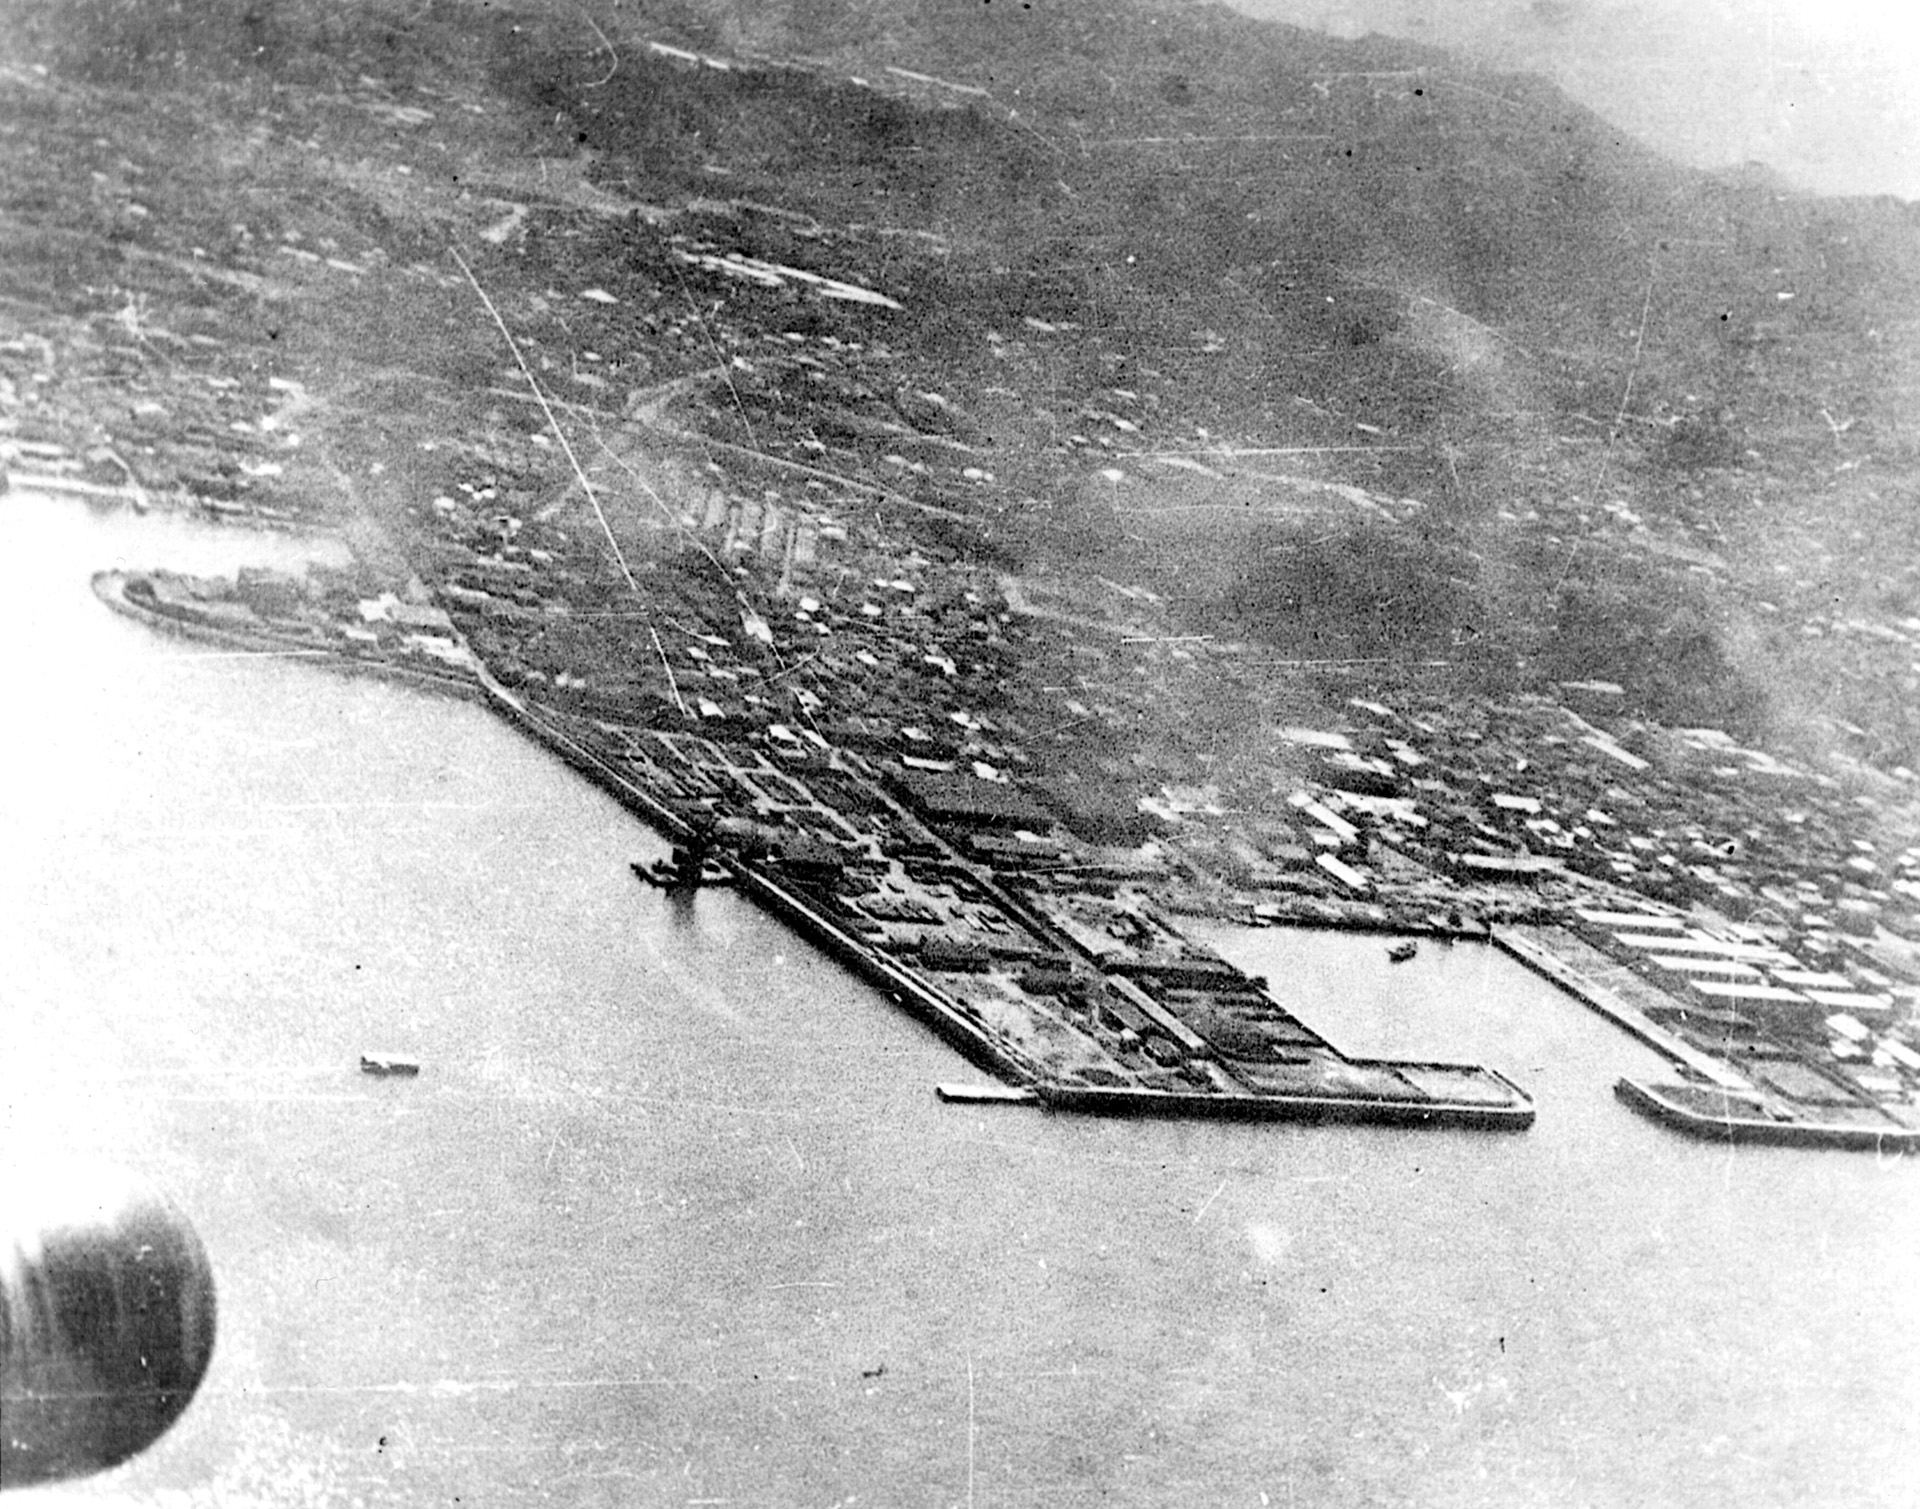 This photo of the Yokusuka naval base was taken from a window in Doolittle’s bomber during the raid.